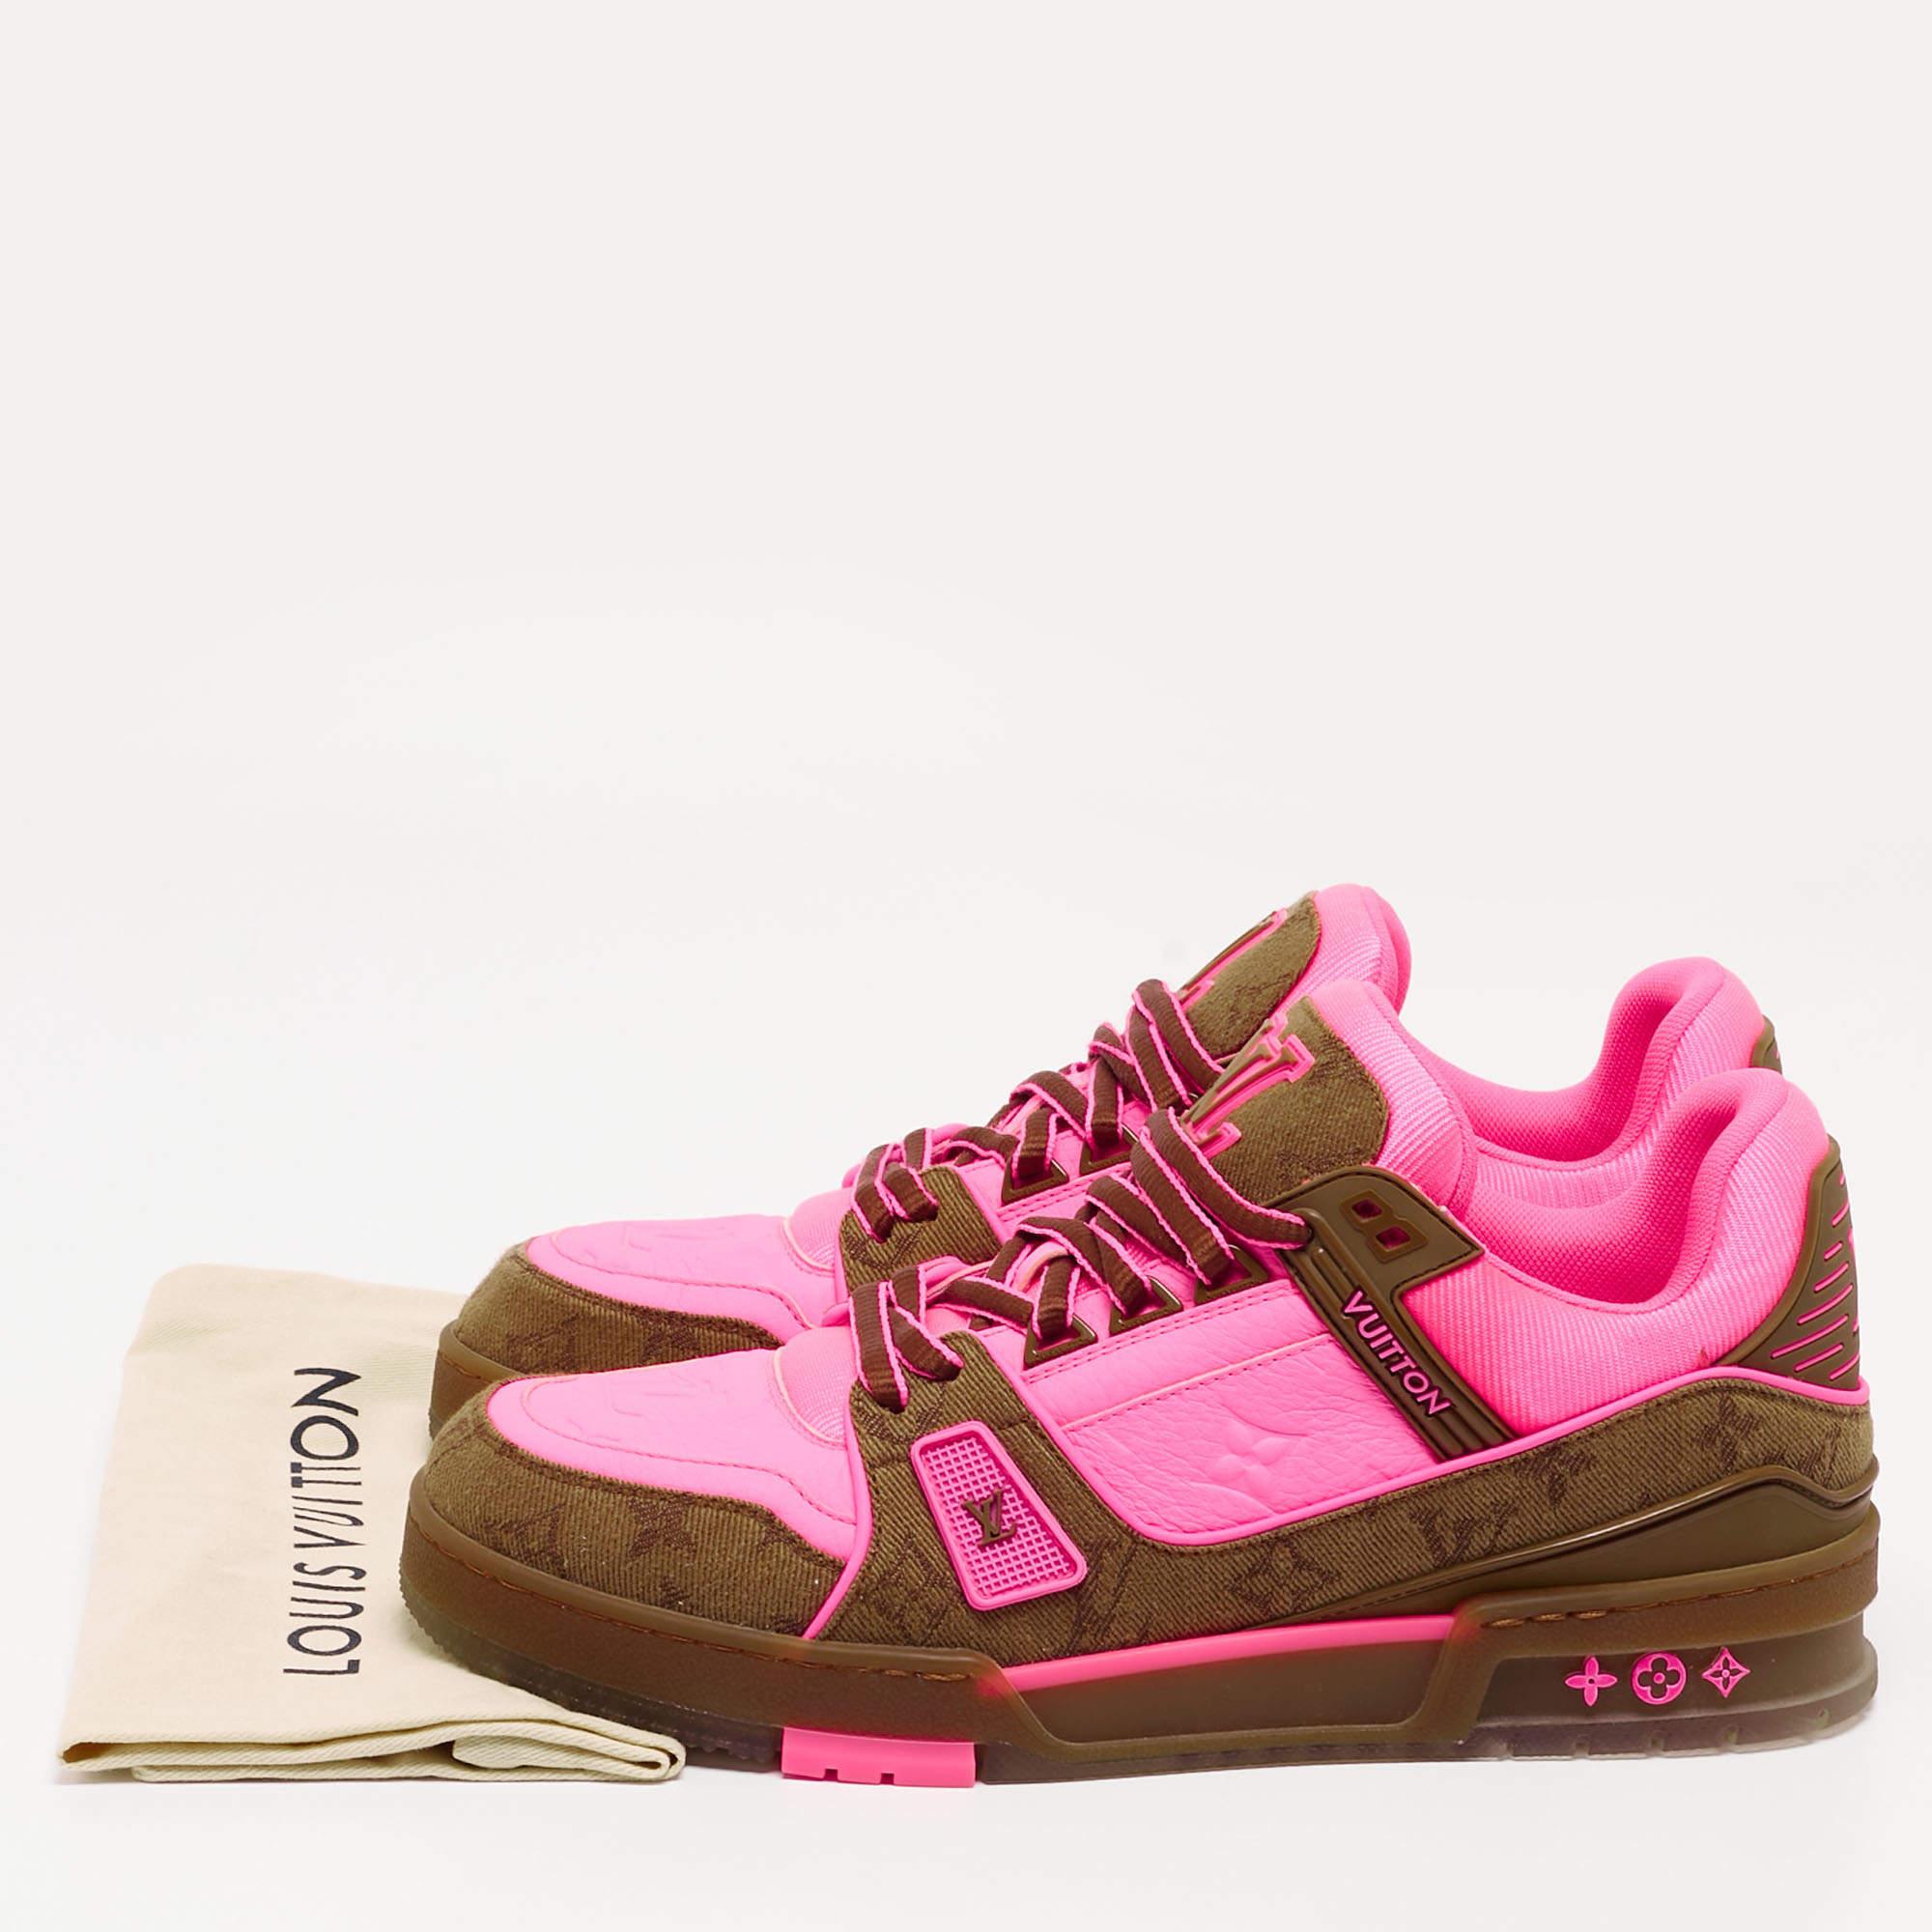 Louis Vuitton Neon Pink/Brown Monogram Leather and Canvas LV Trainer Sneakers Si 6